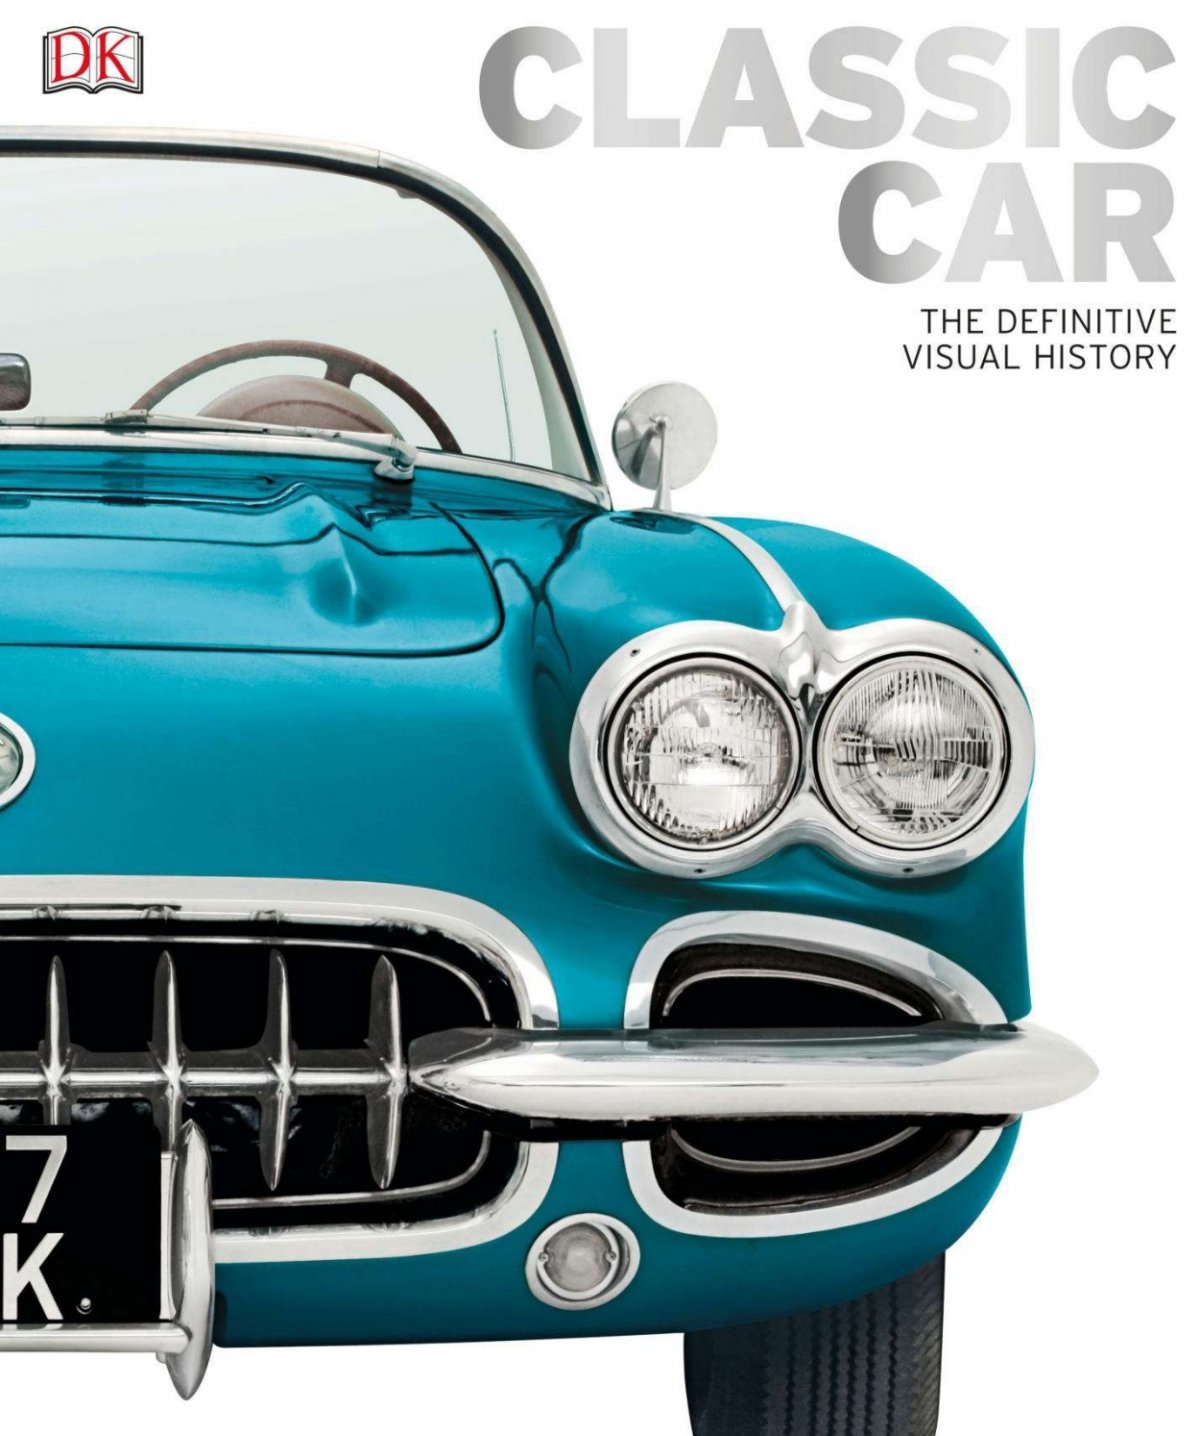 Classic Car The Definitive Visual History by Chauney Dunfort (74 MB) (1) (1)